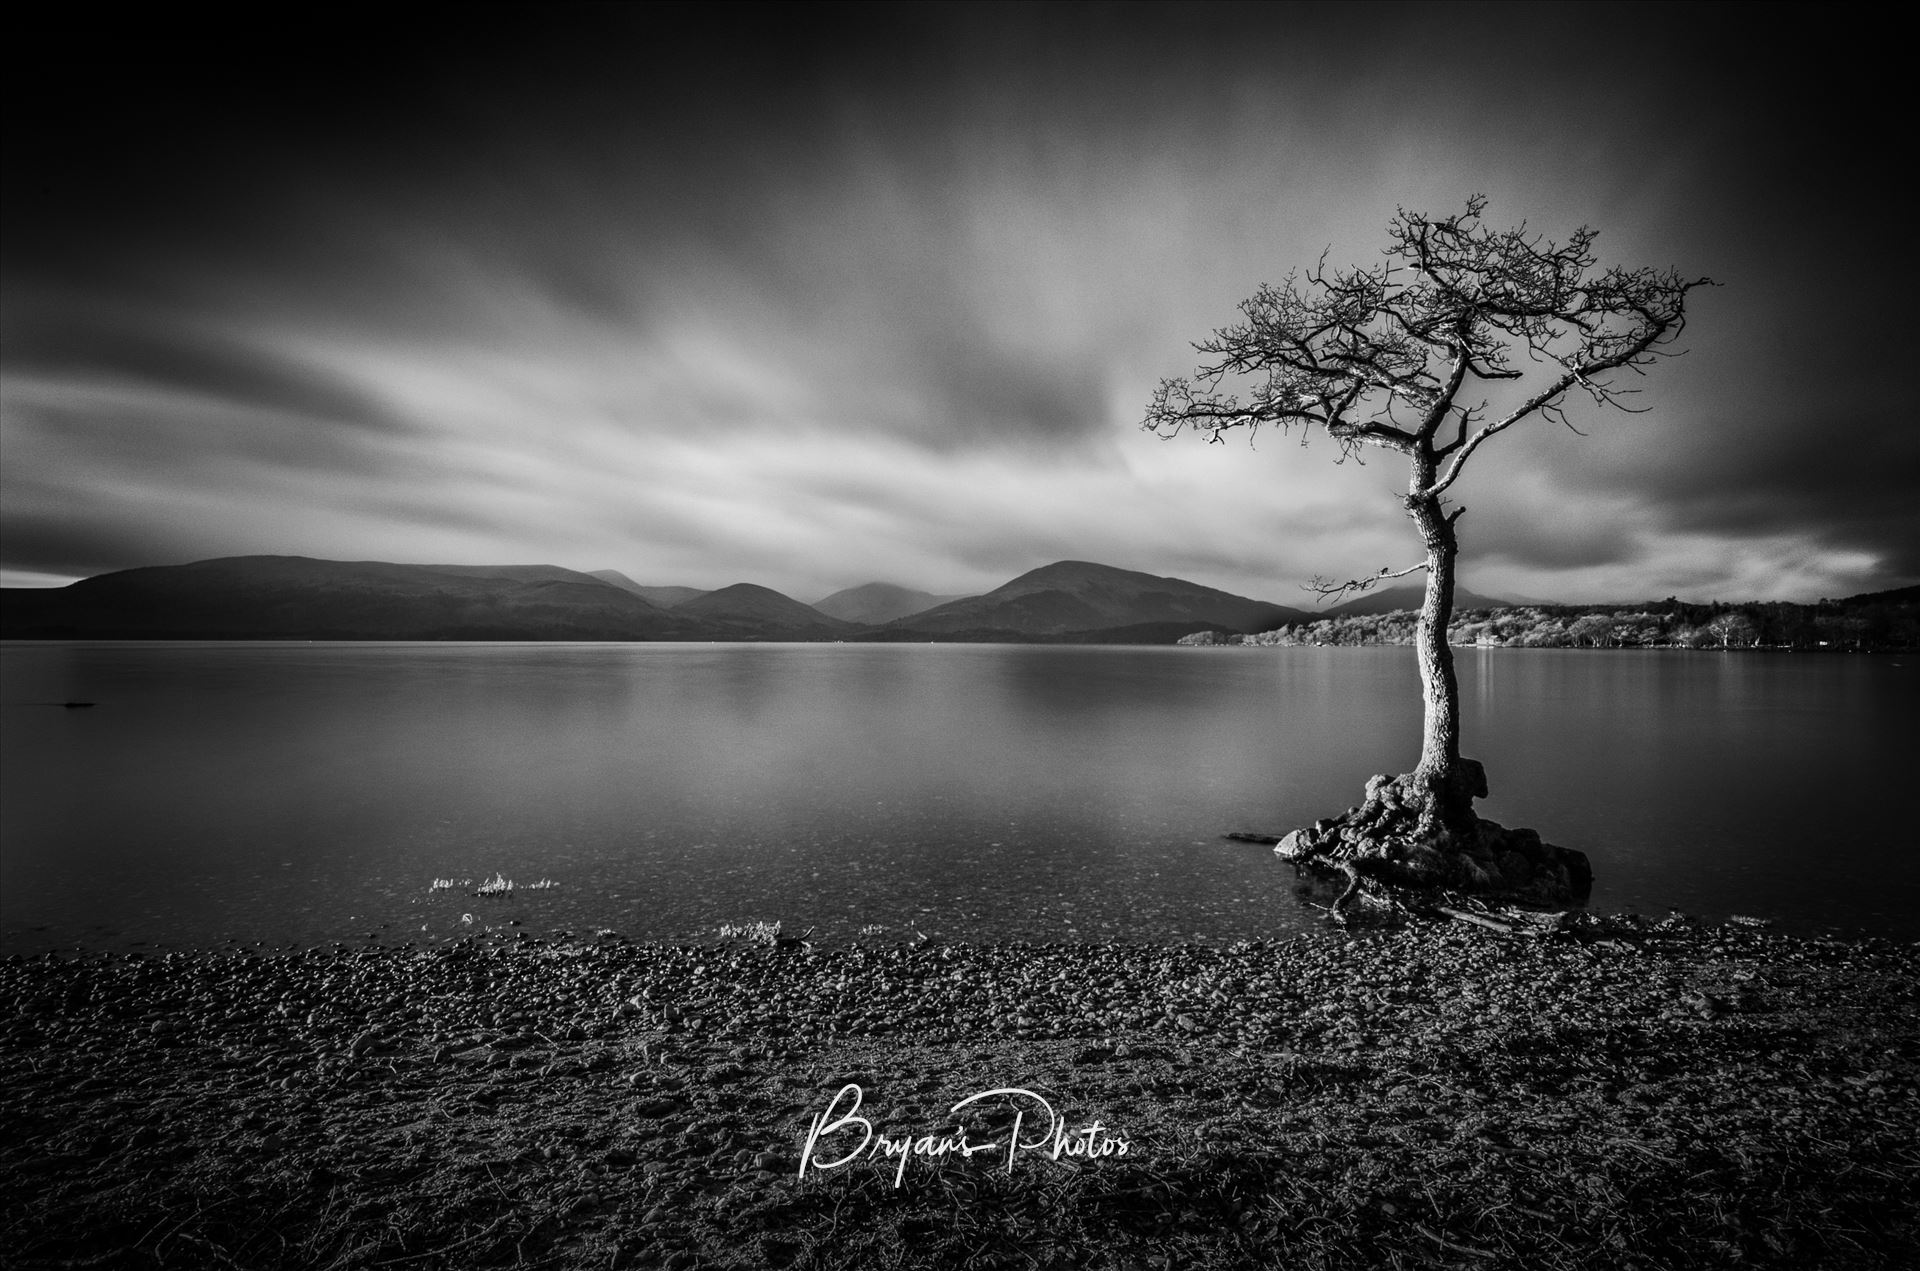 Milarrochy A black & white photograph of Loch Lomond taken from Milarrochy Bay on the eastern shore of the loch near Balmaha. by Bryans Photos